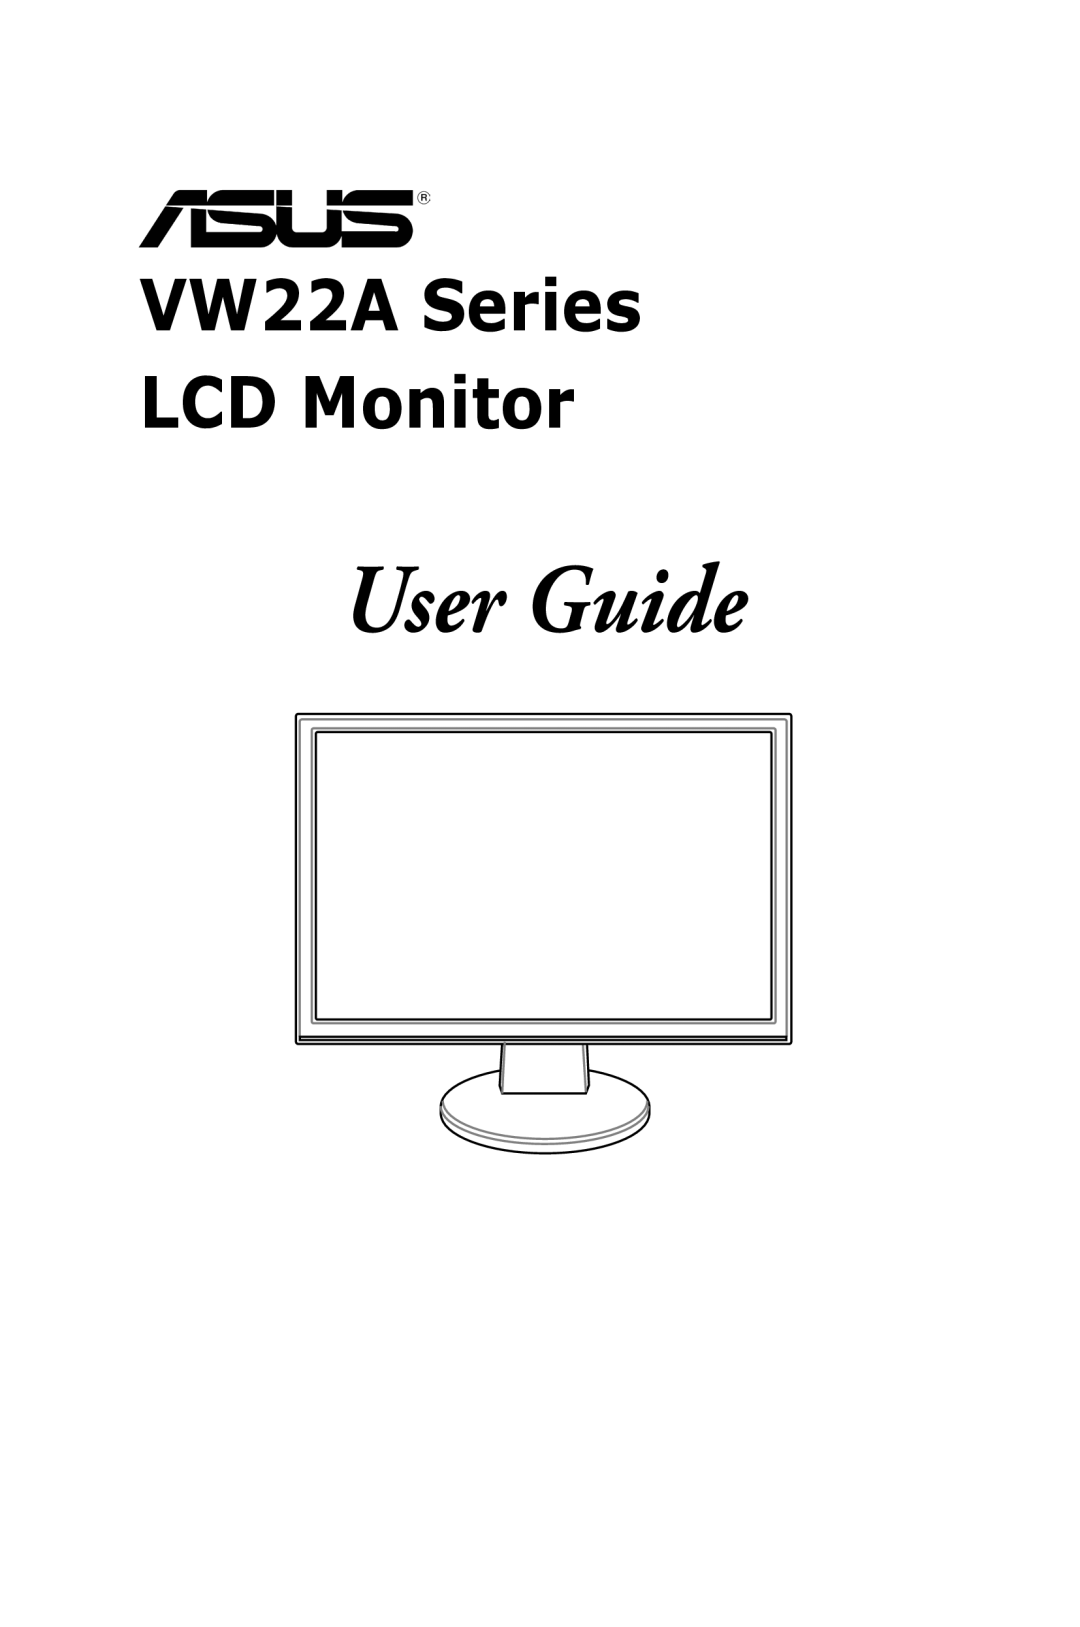 Asus VW22ATCSM manual User Guide, VW22A Series LCD Monitor 